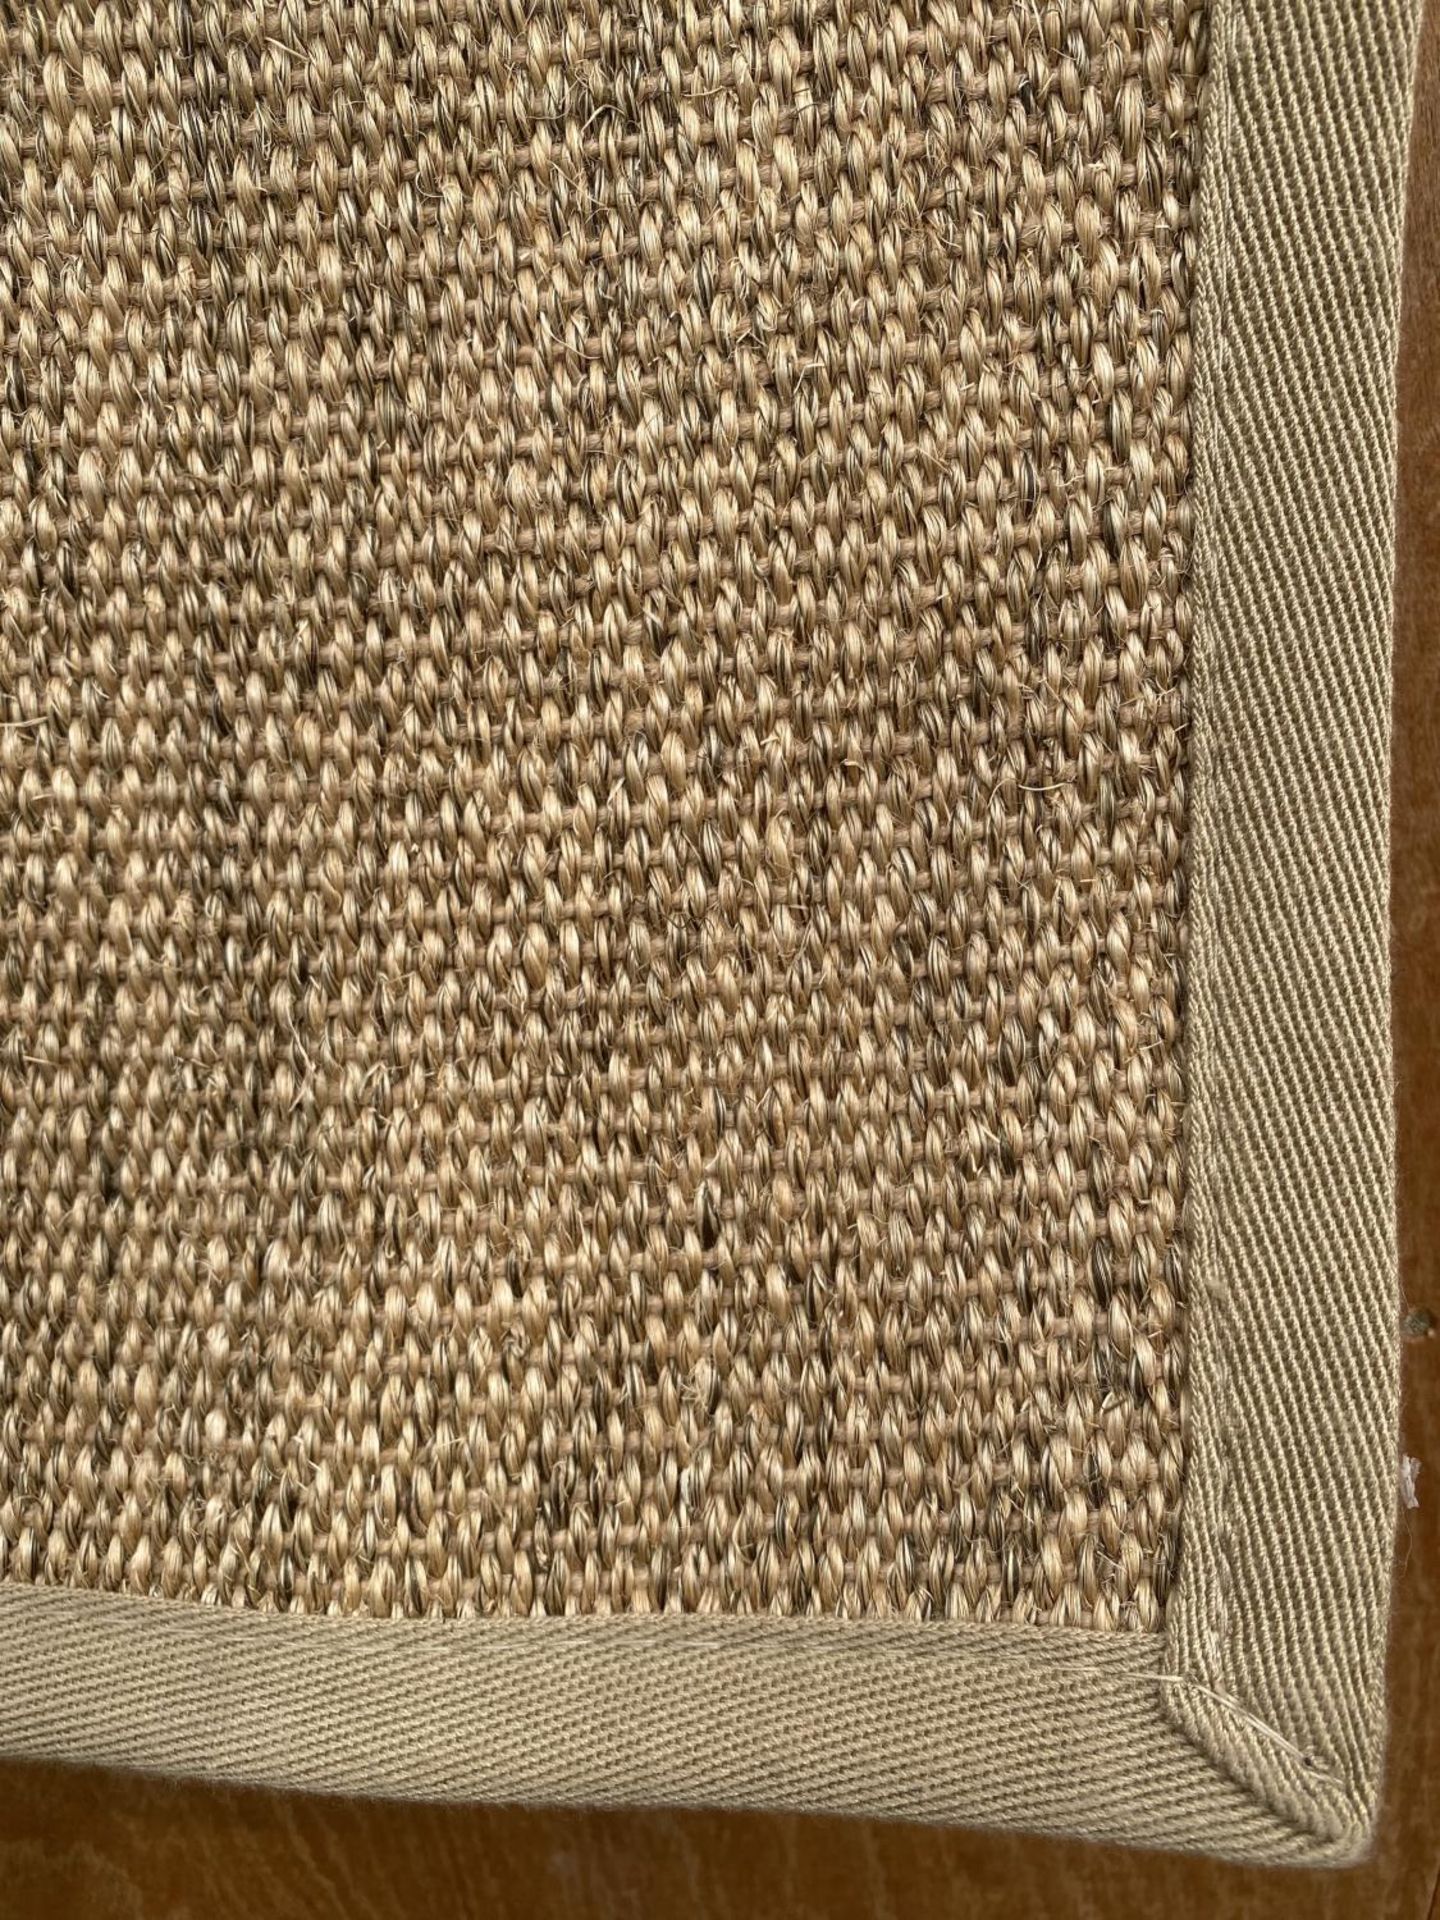 A LARGE MODERN HESSIAN STYLE RUG - Image 3 of 3